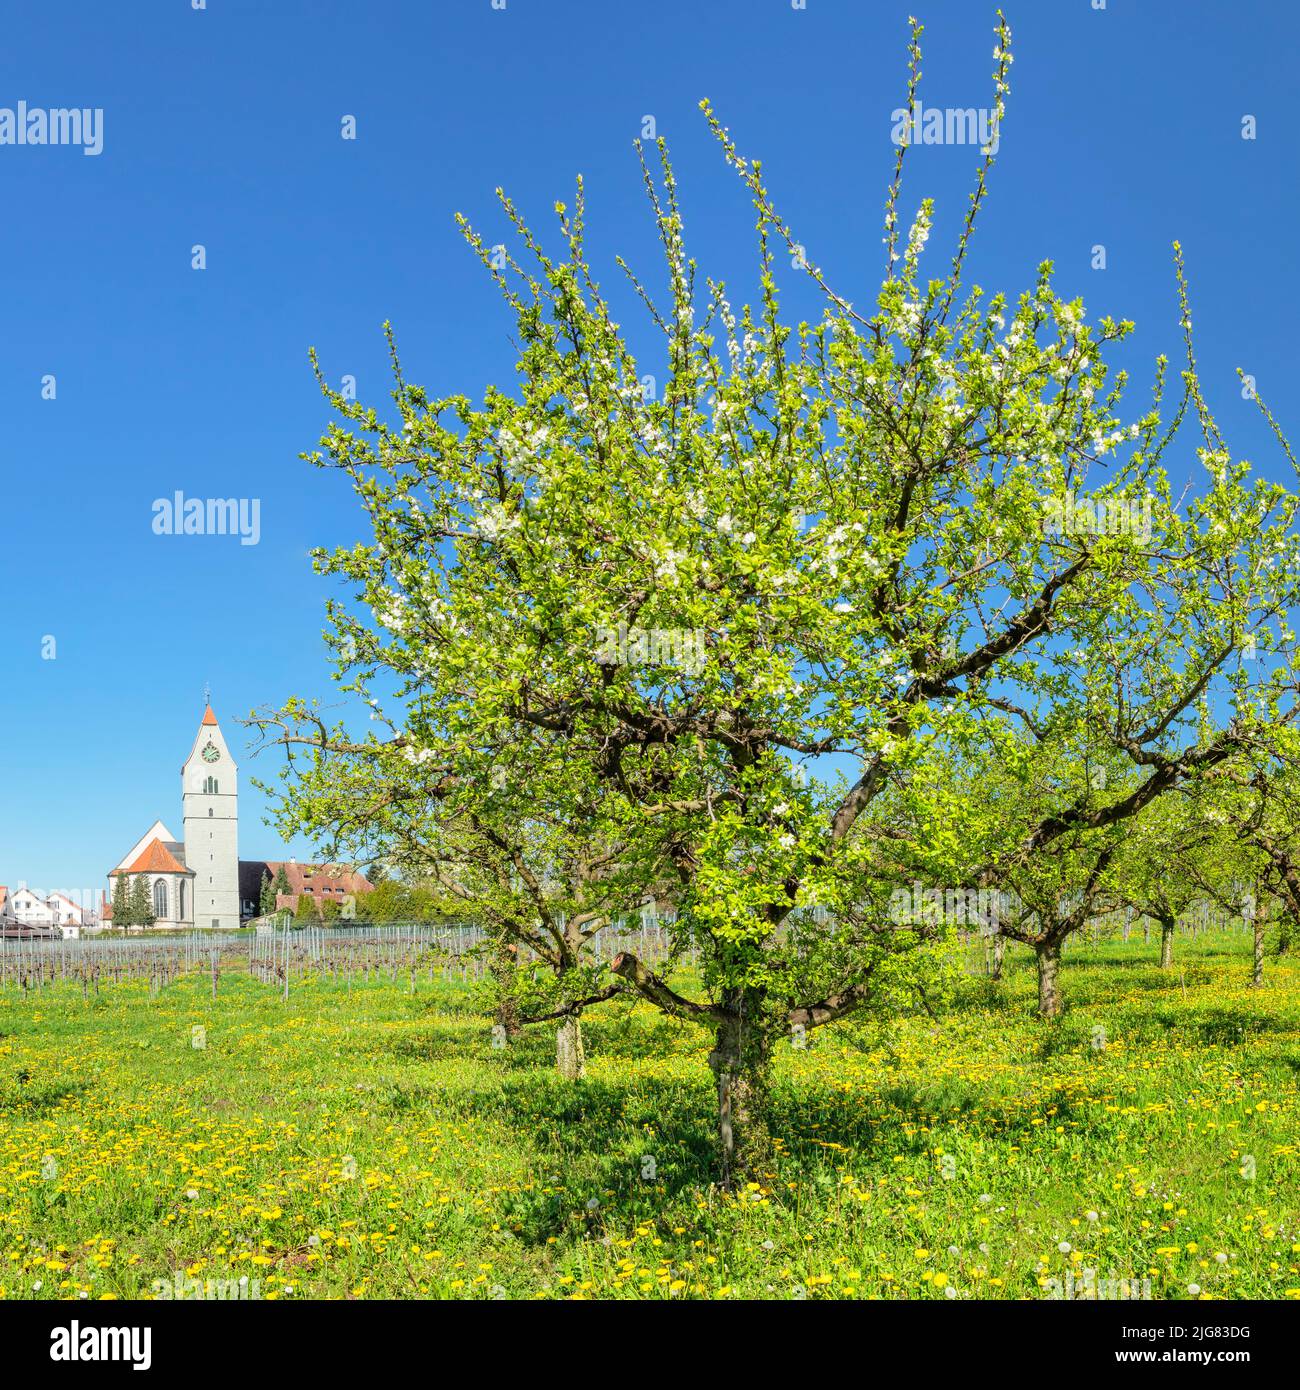 Fruit tree blossom in spring, Hagnau am Bodensee, Baden-Württemberg, Germany Stock Photo